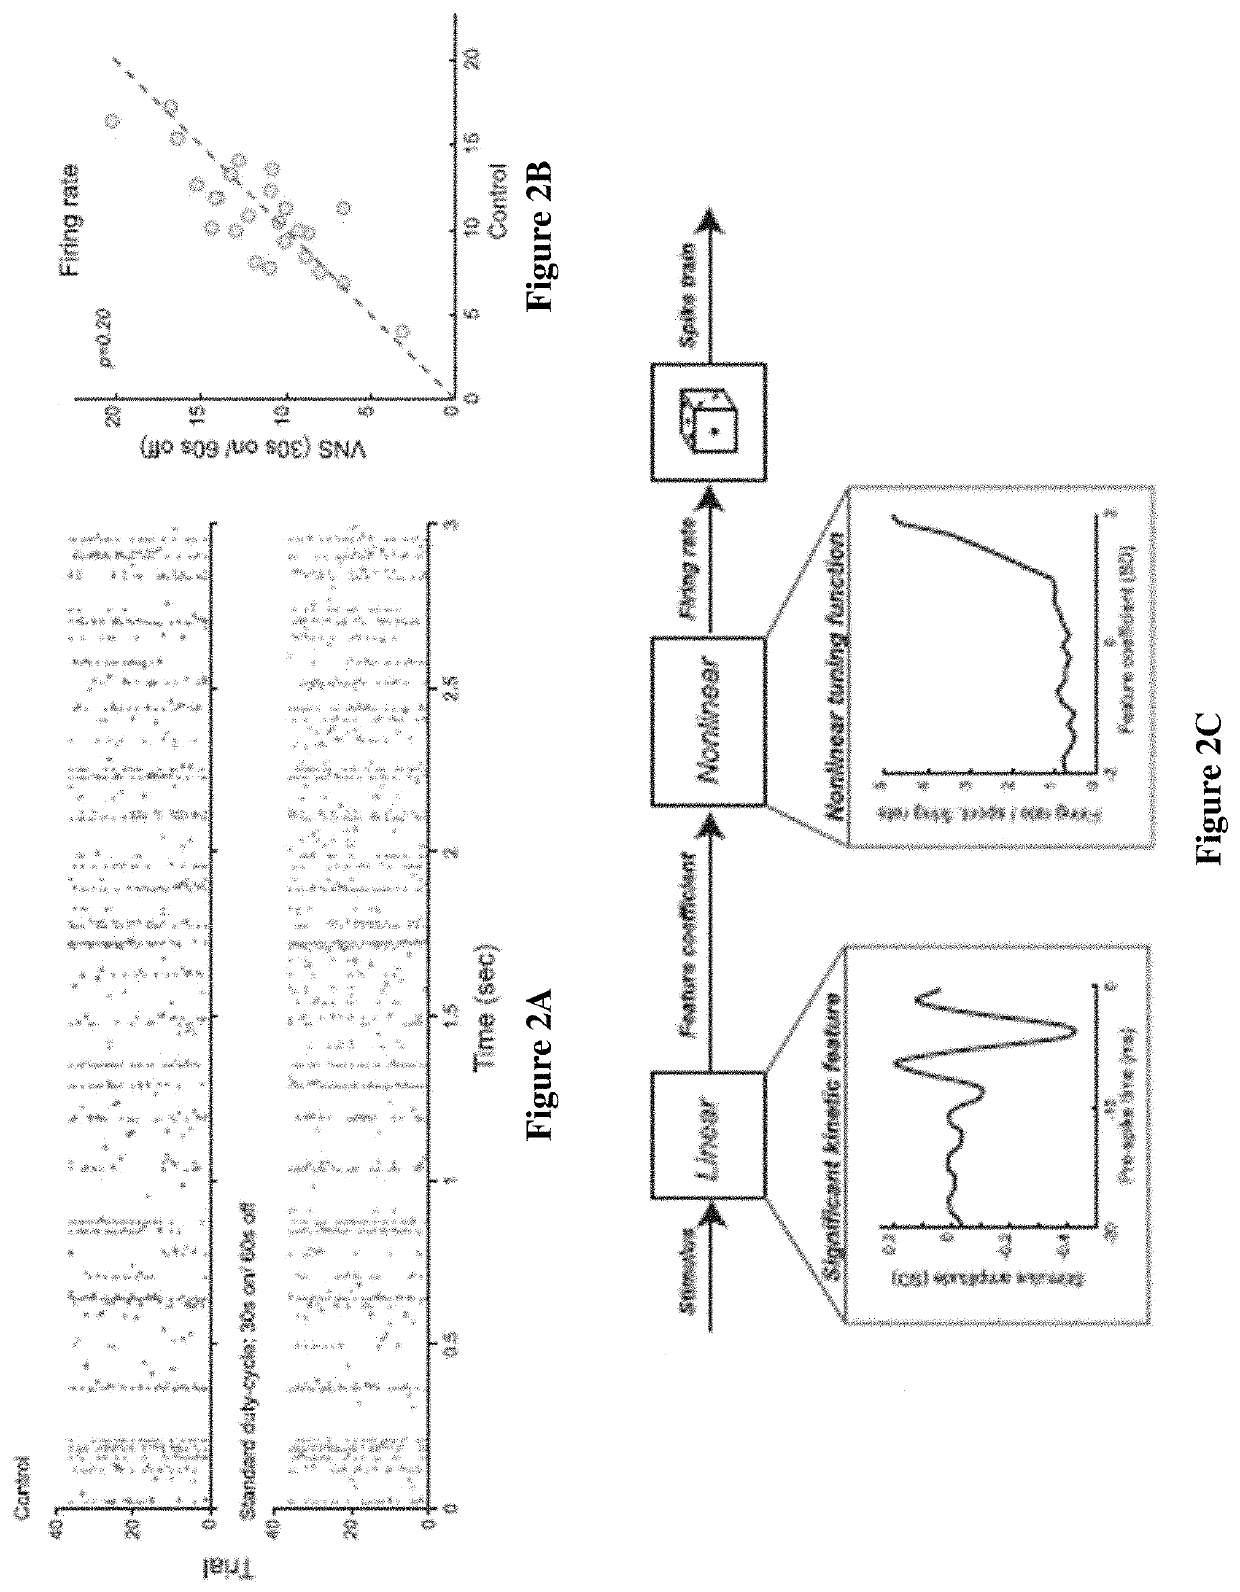 Methods and Devices for Improving Sensory Perception by Tonic Vagus Nerve Stimulation